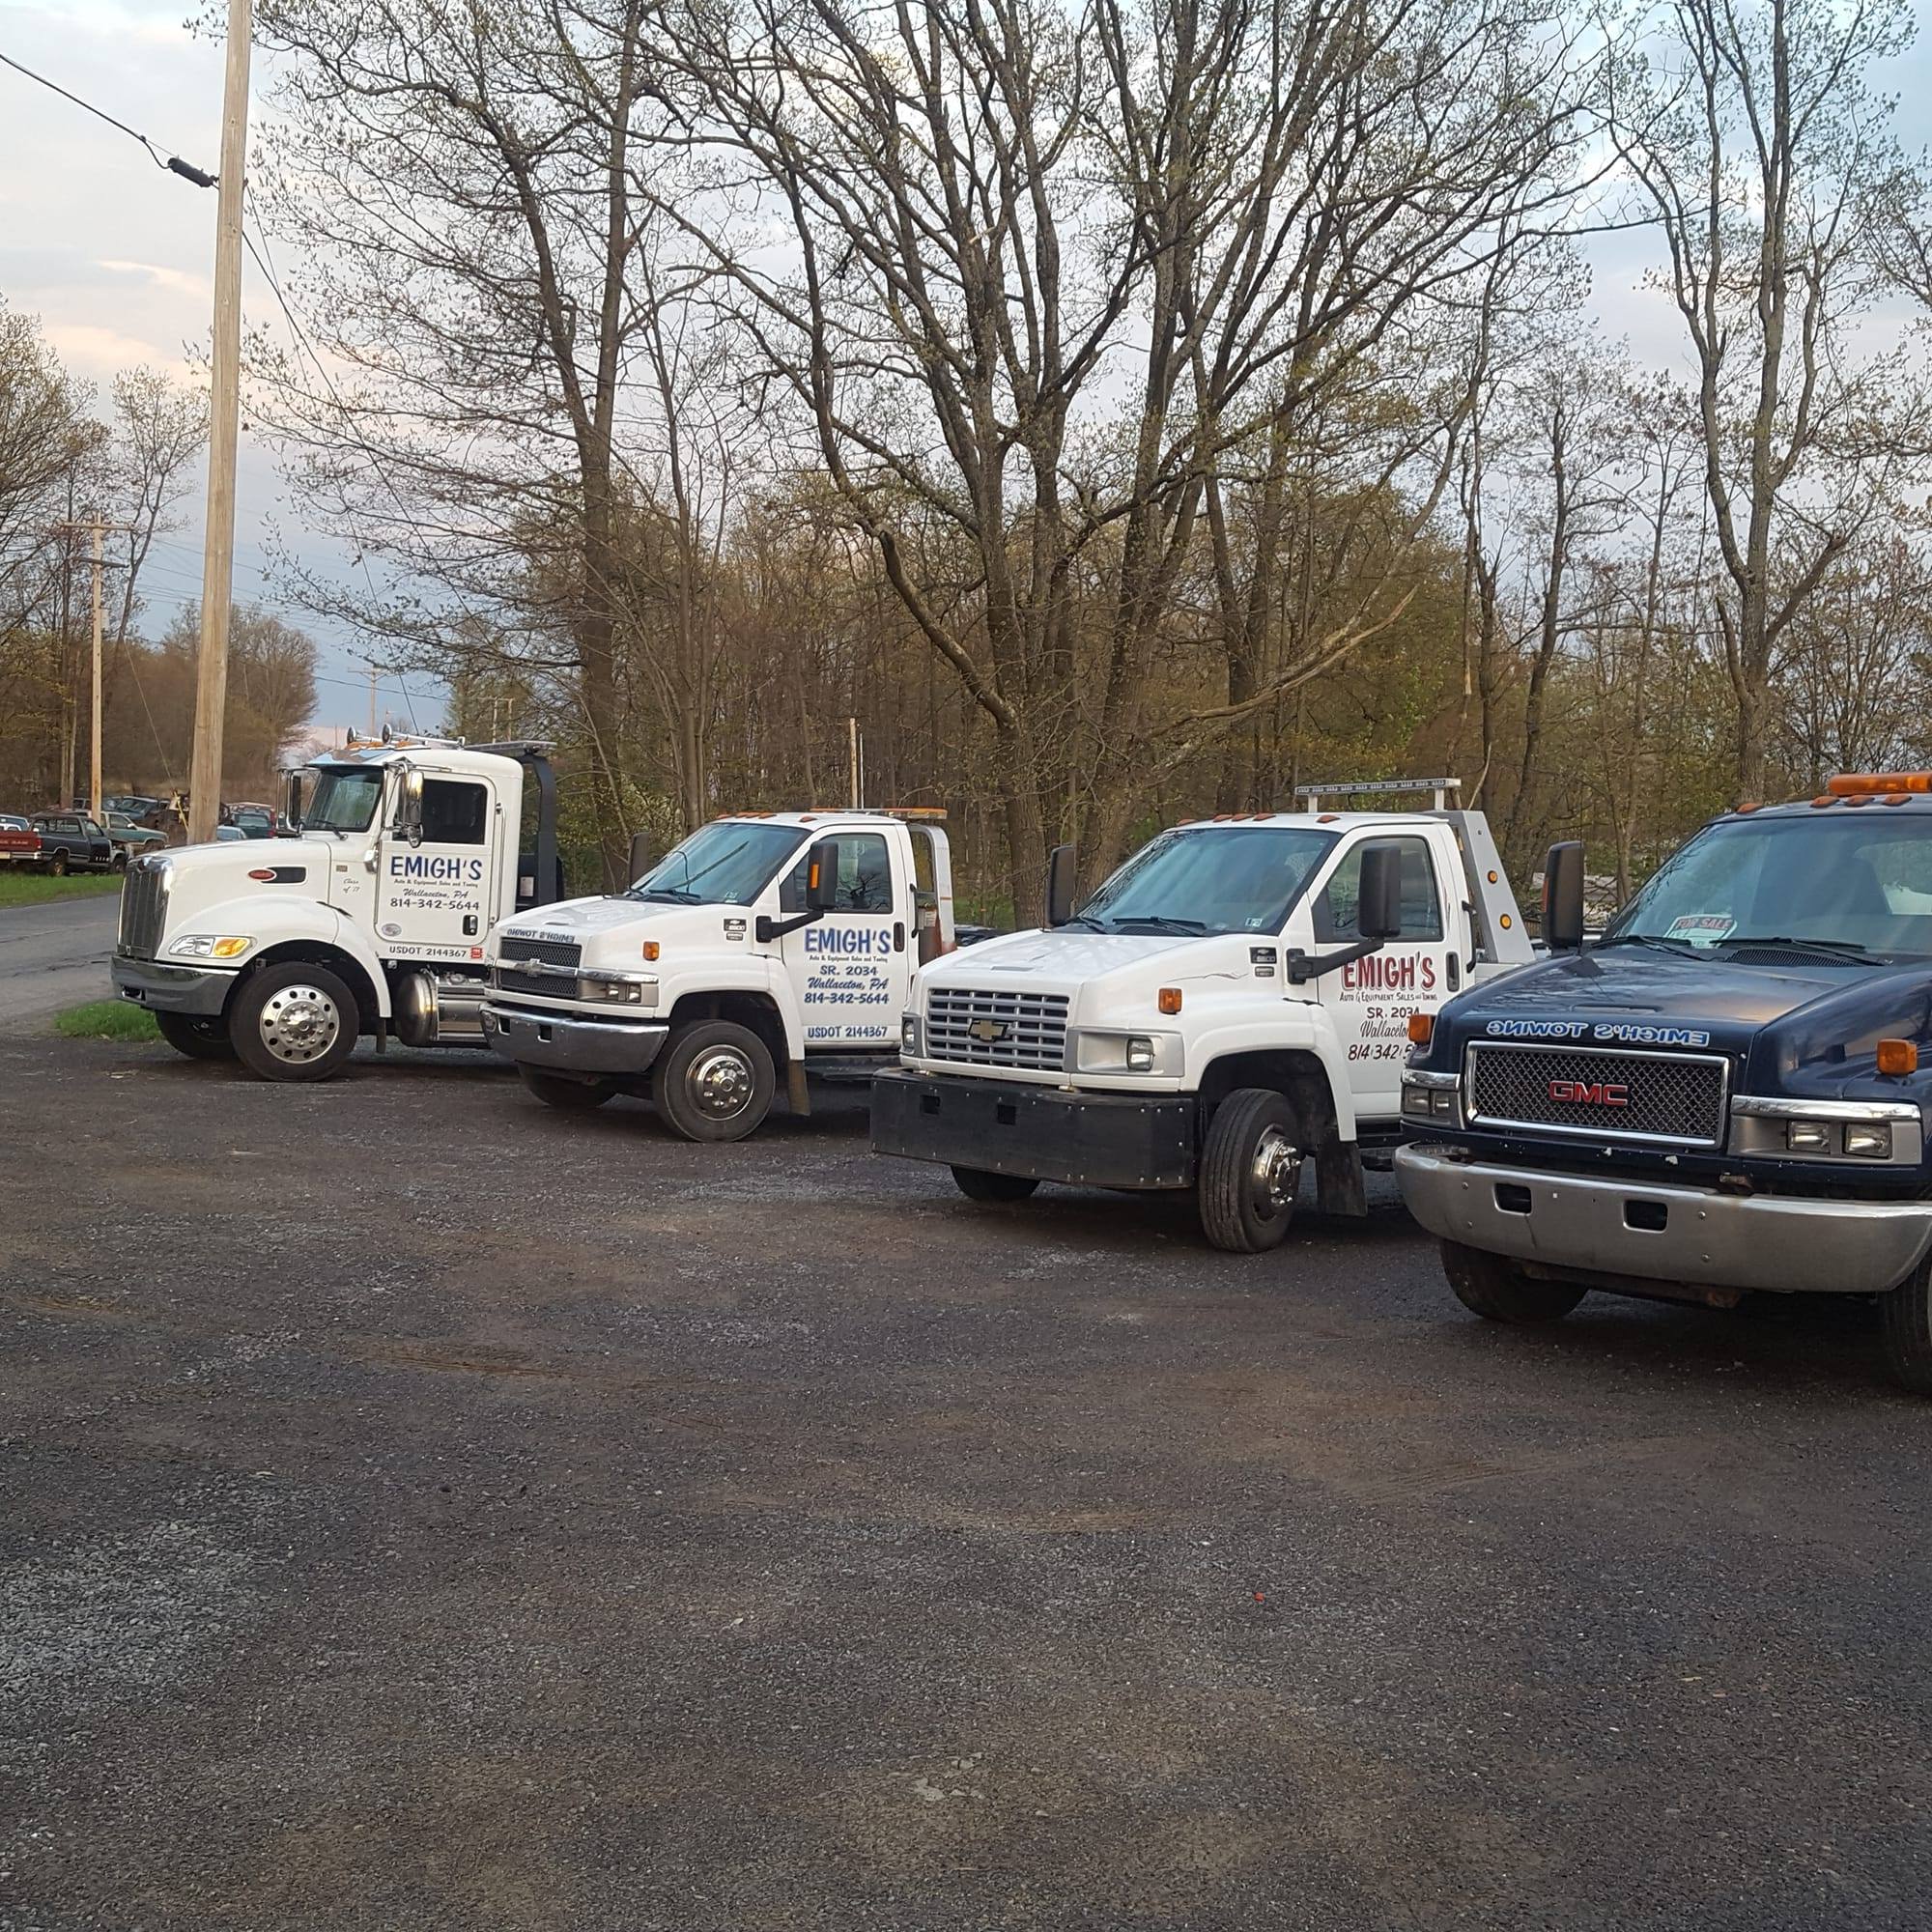 Emigh's Auto Sales & Repair & Towing